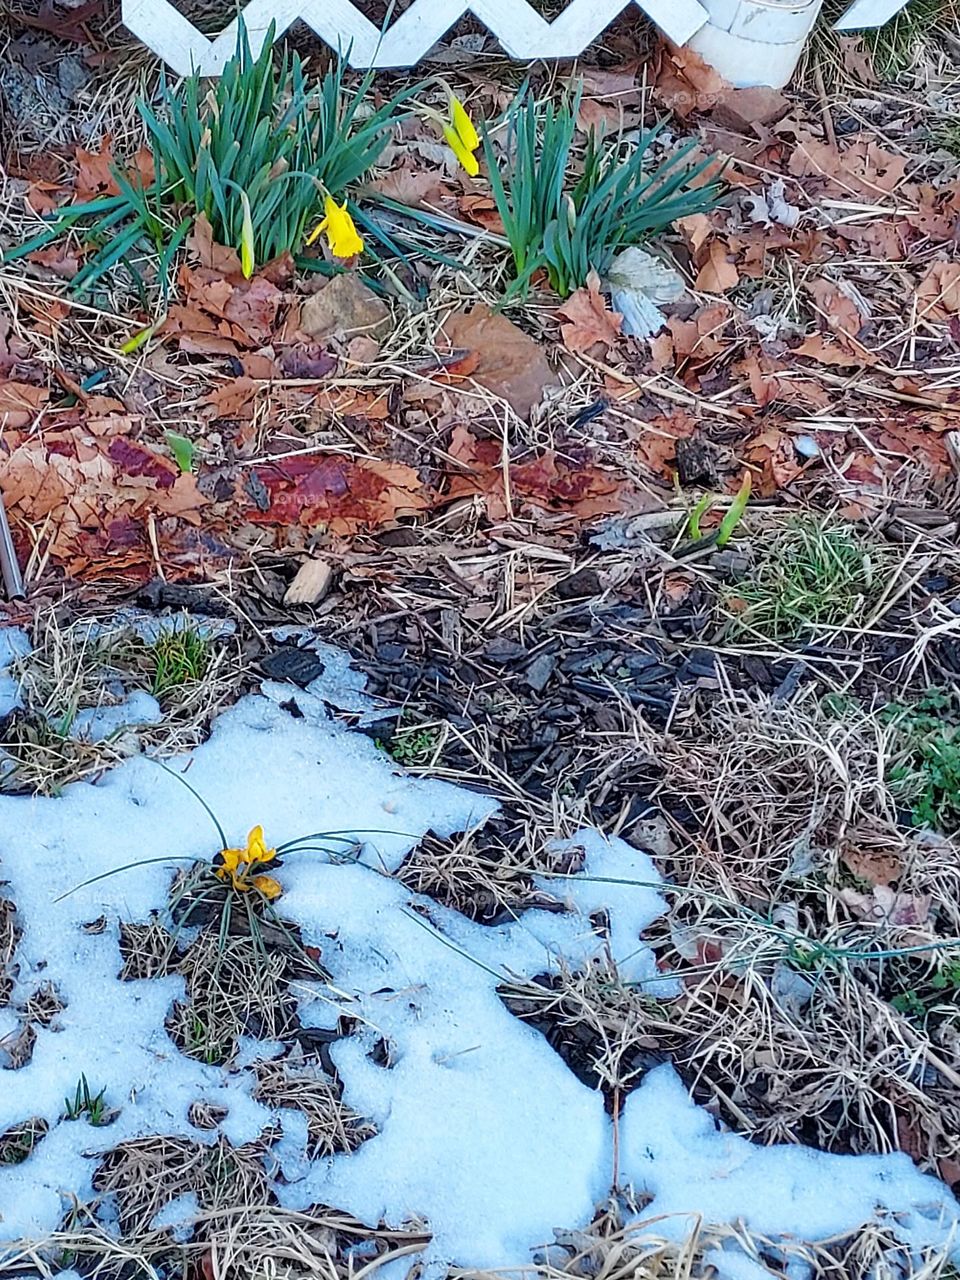 signs of spring are showing even through the ice that is now finally melting and soon will be gone.